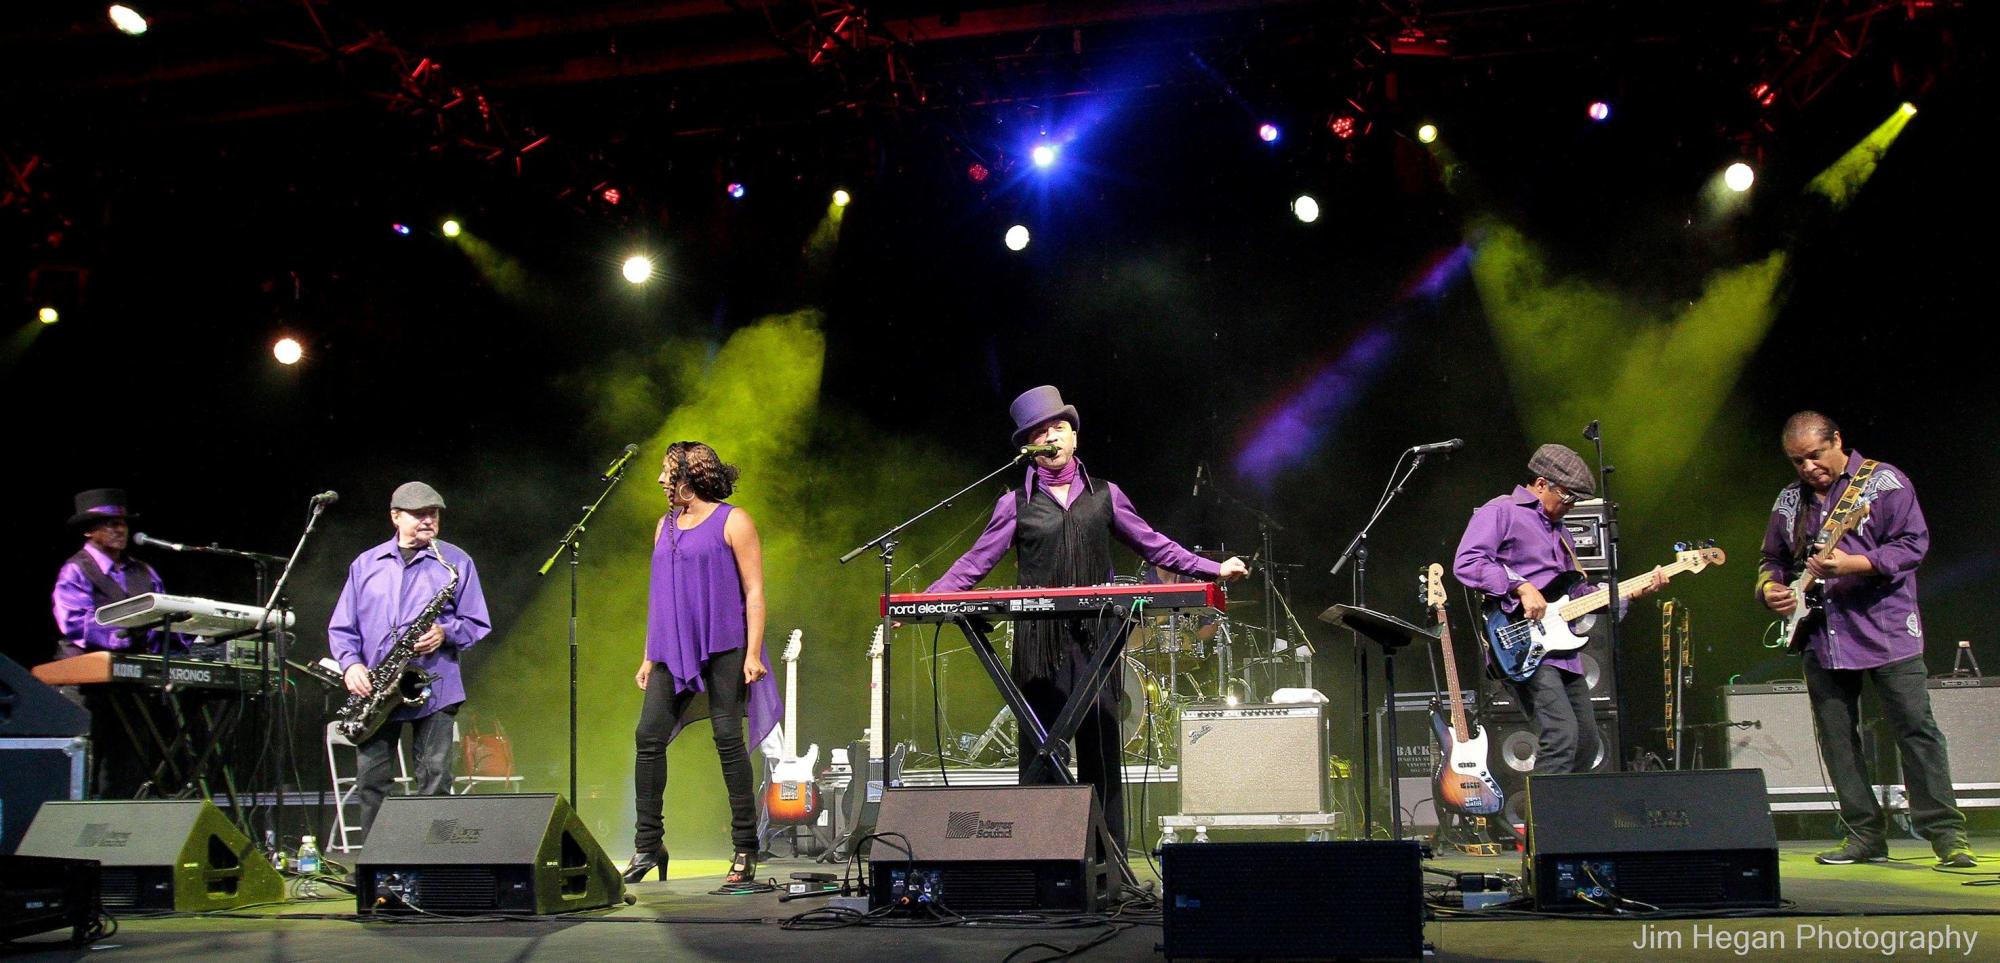 Six band members dressed in purple play on a stage. The center man is in a top hat.